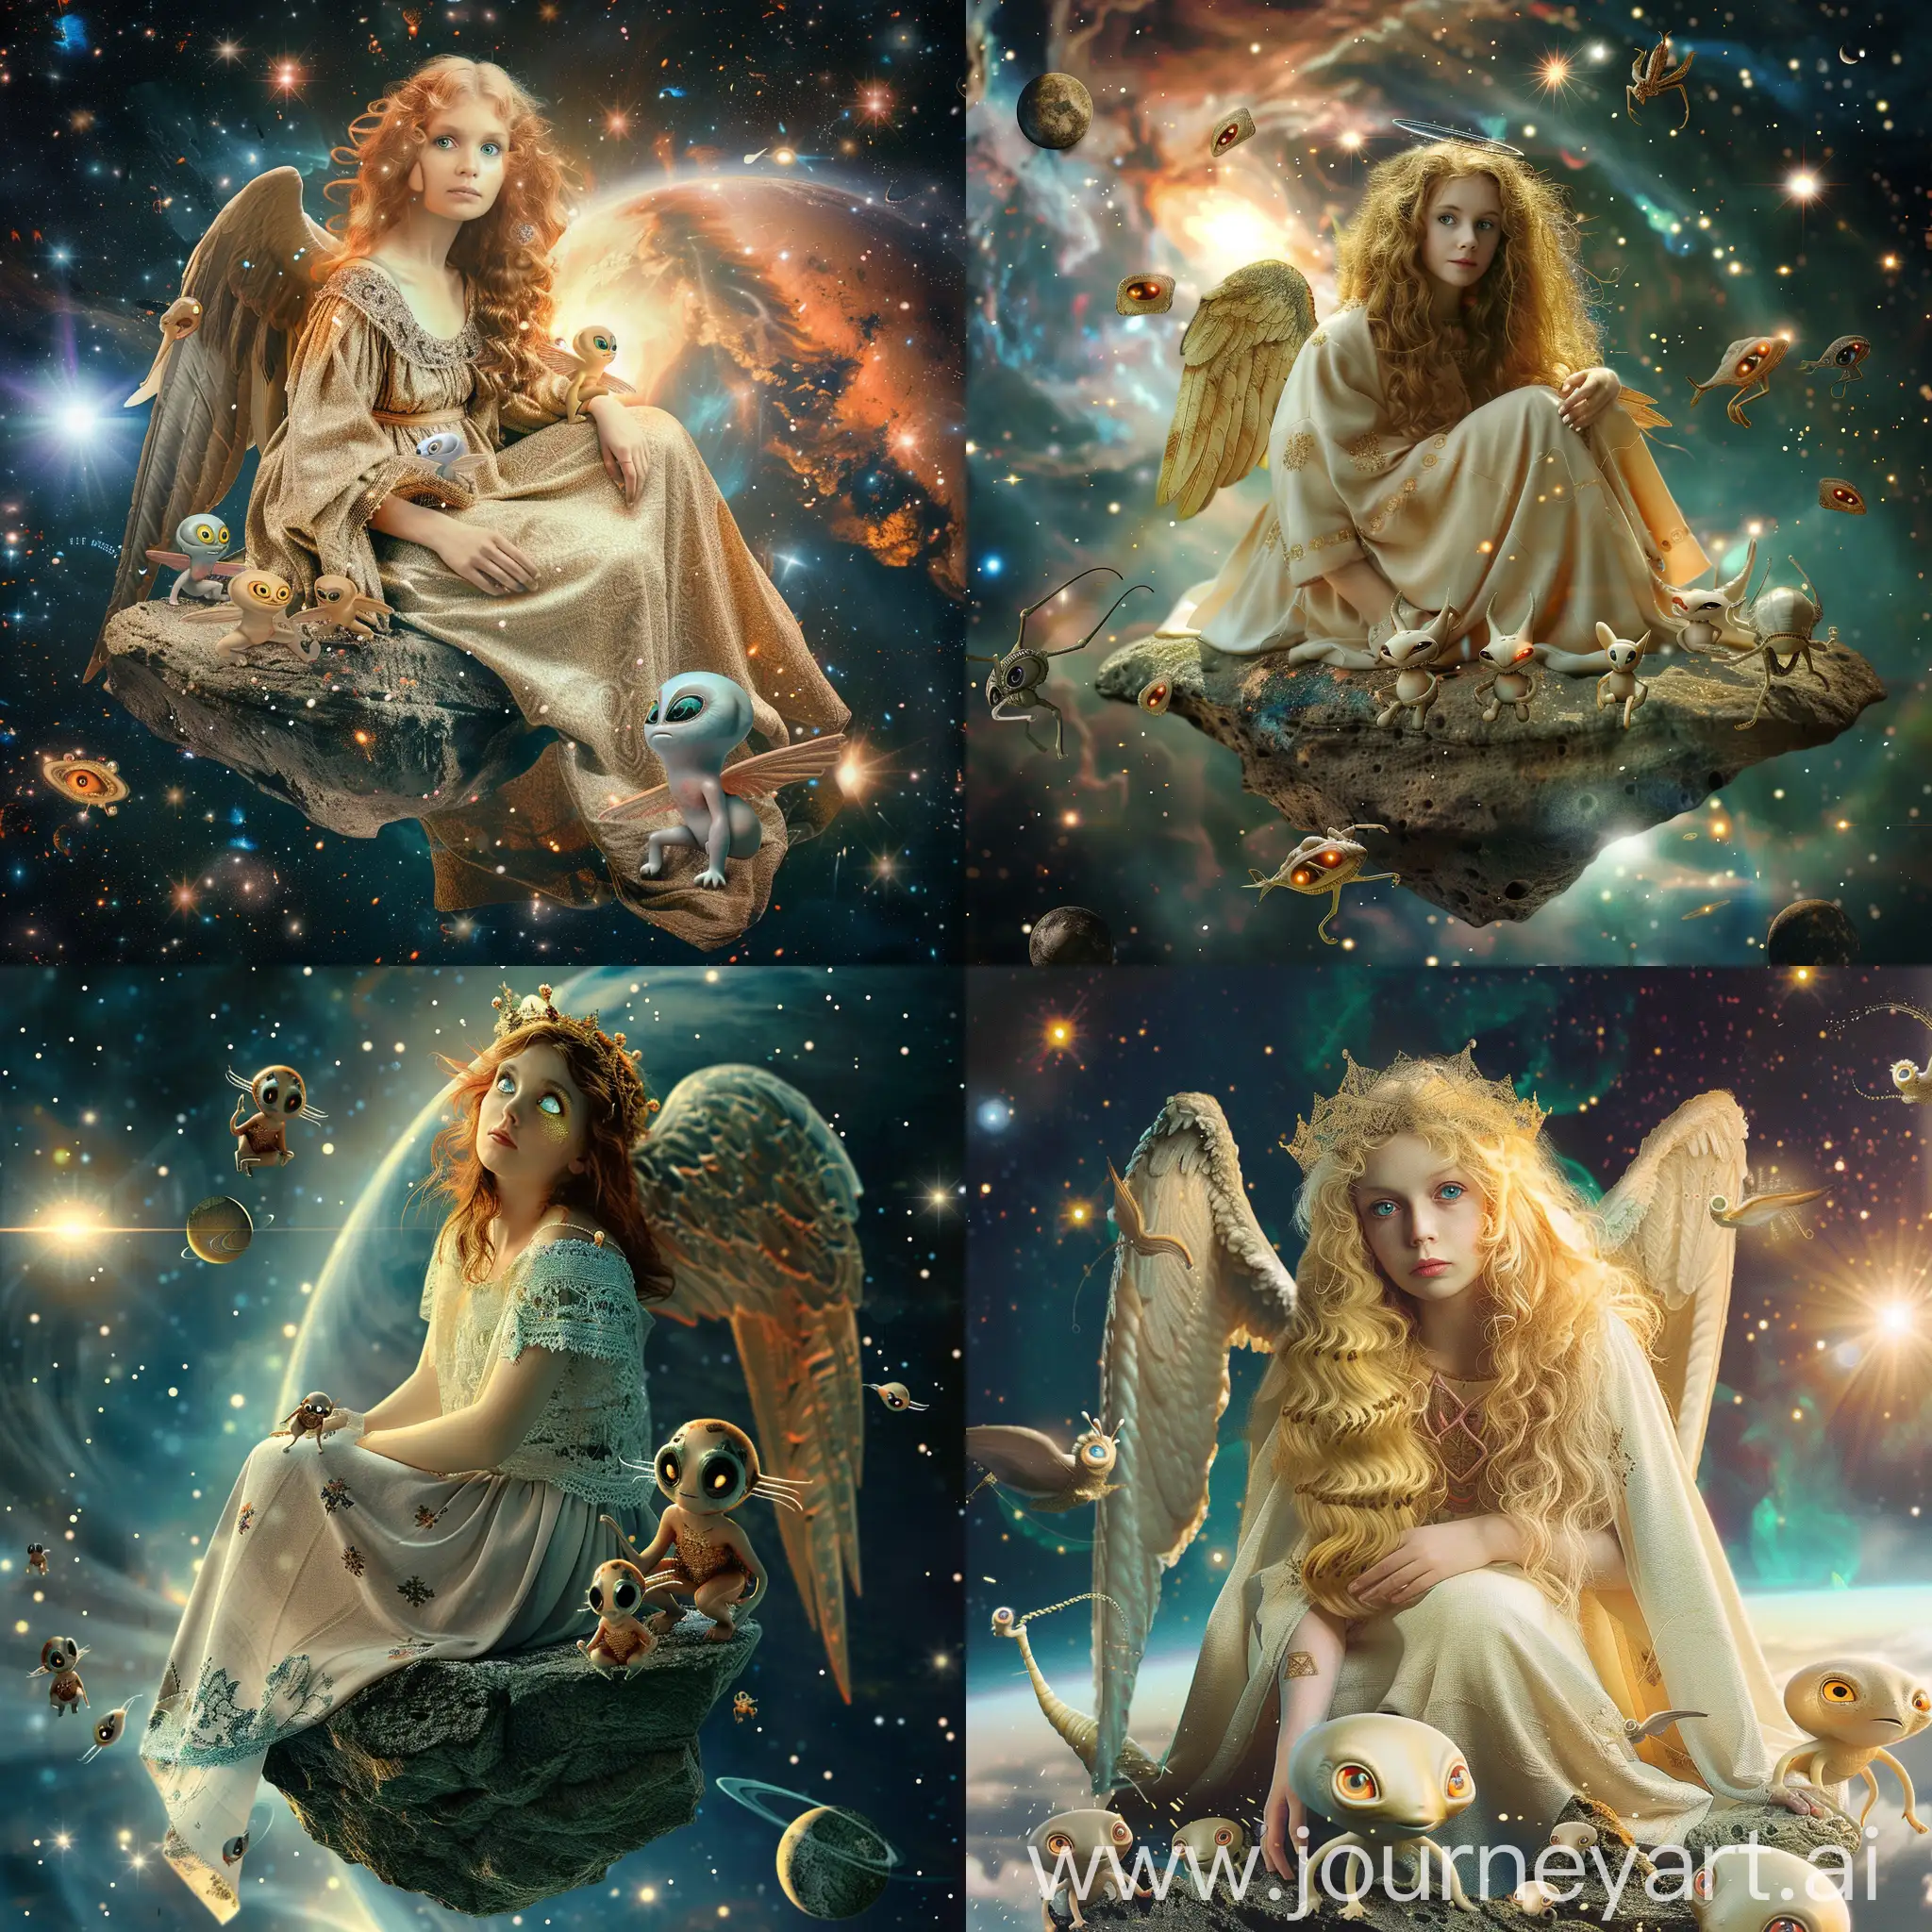 A beautiful medieval angel woman with beautiful eyes sitting on a floating rock in space surrounded by tiny cute aliens. Background is outer space and bright stars. Photographic